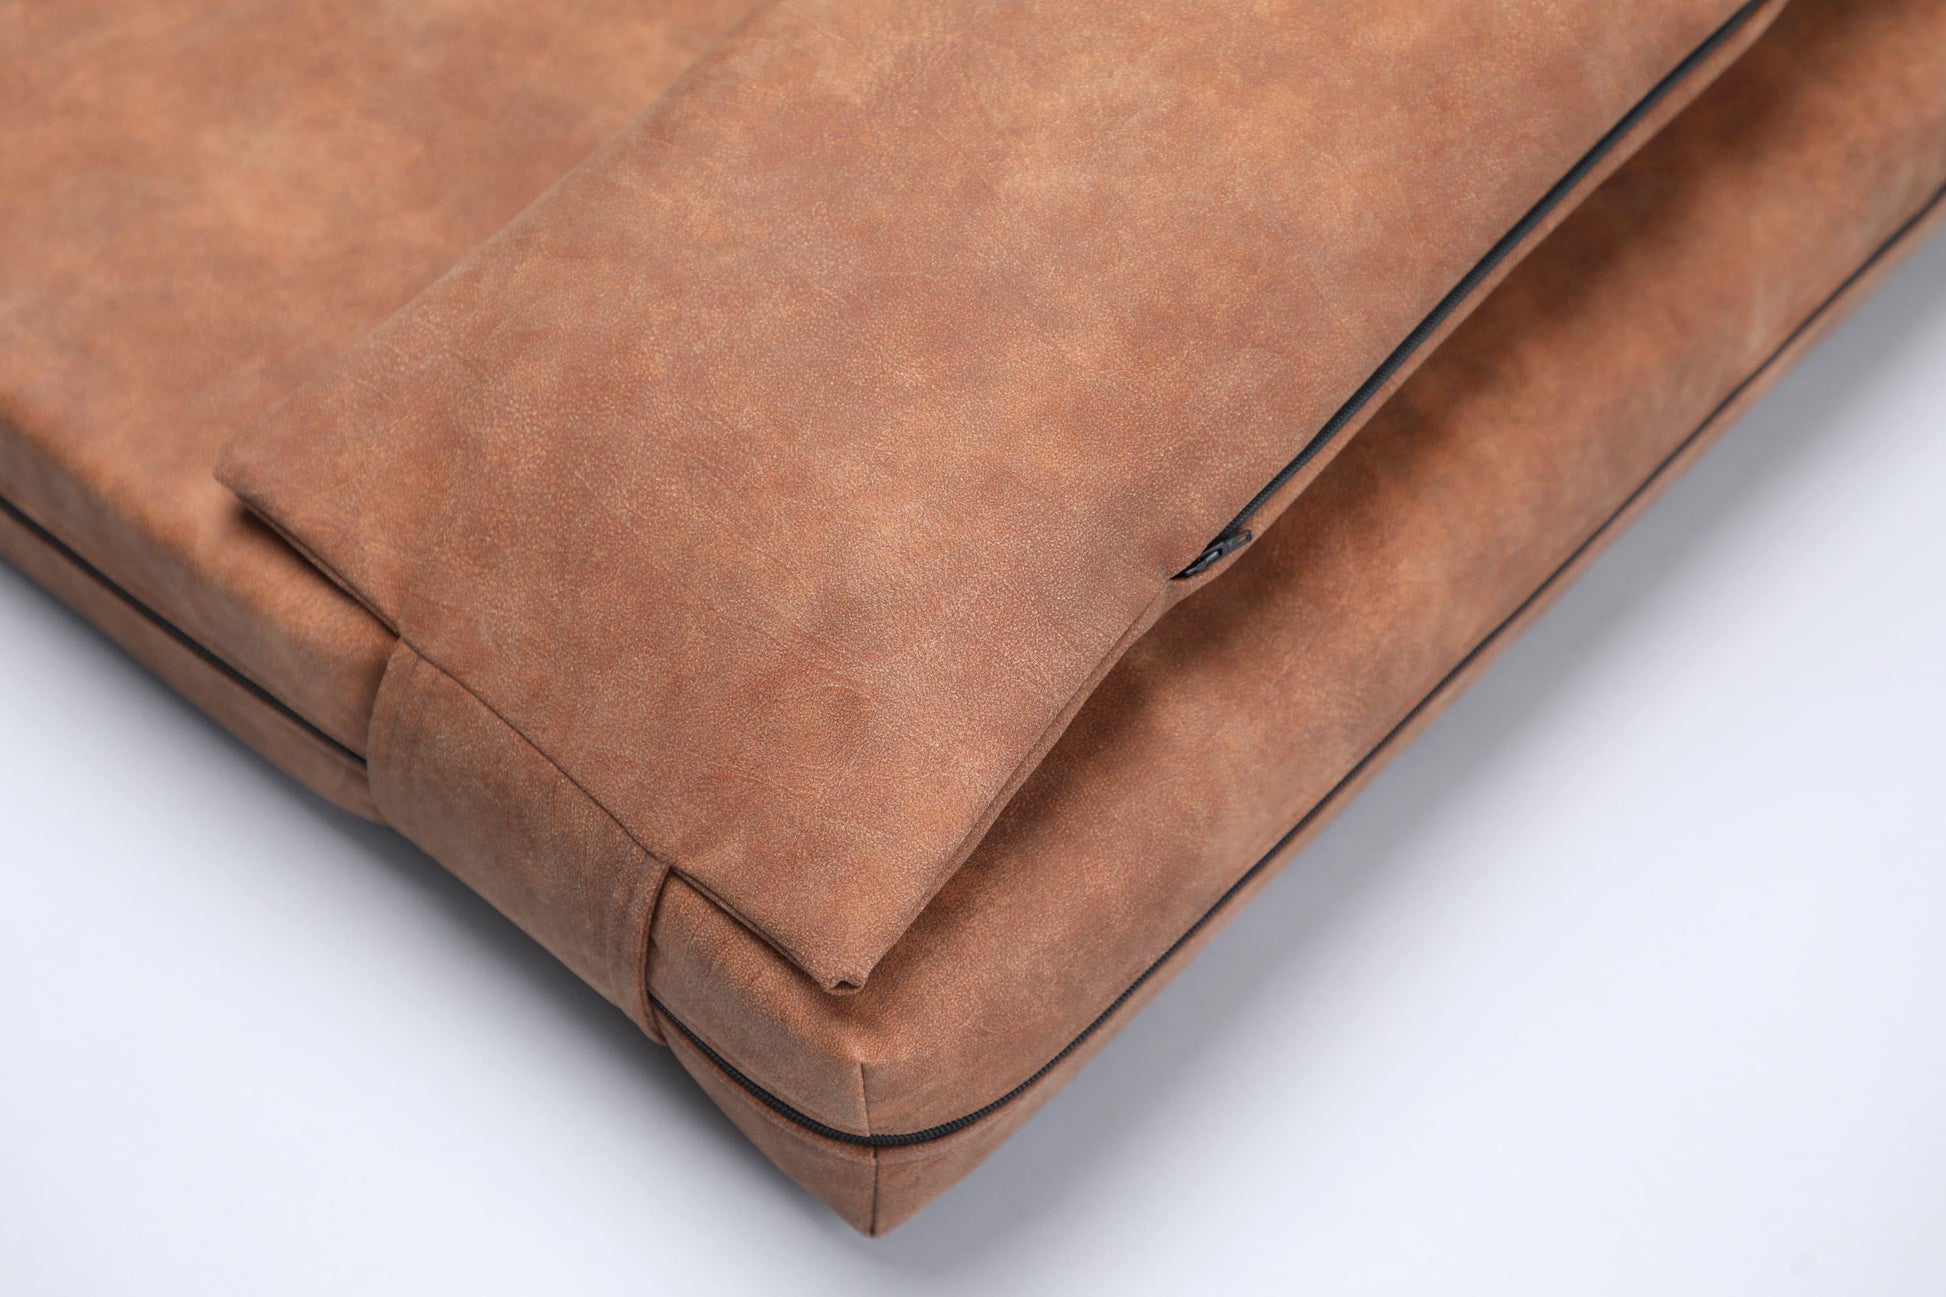 Dog bed for large dogs | Extra comfort & support | 2-sided | Water resistant | TAWNY BROWN - premium dog goods handmade in Europe by My Wild Other